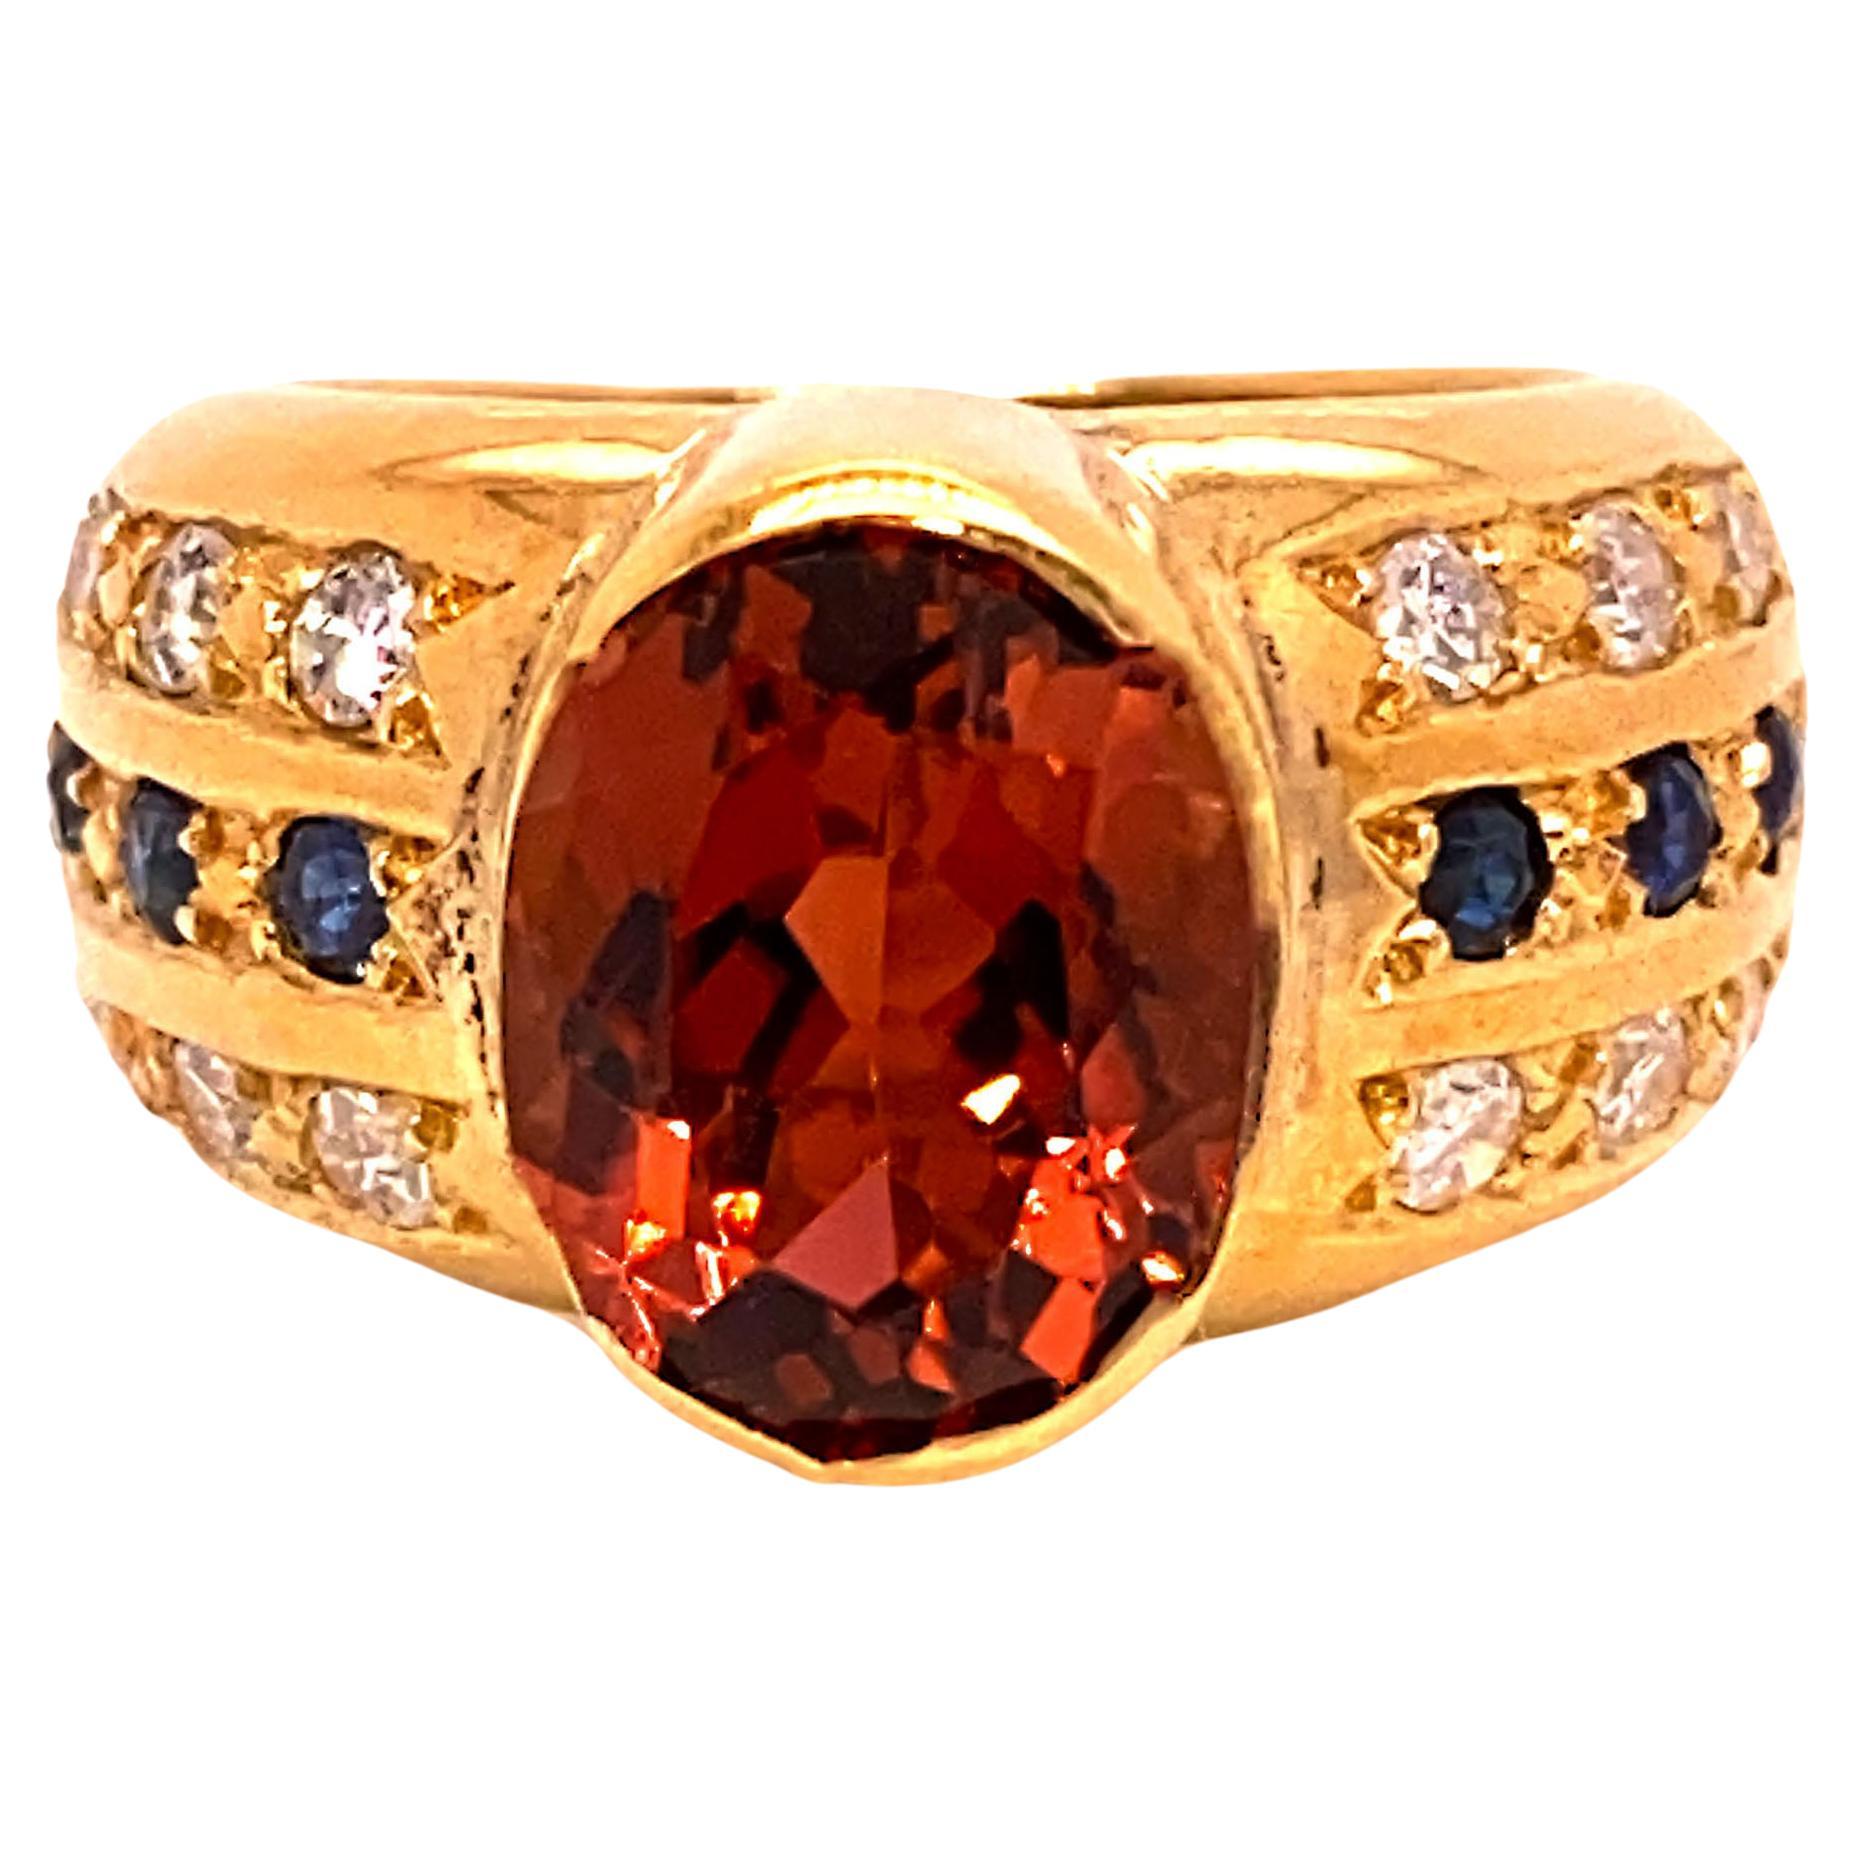 Brilliant Golden Brown Tourmaline in 18K rich yellow gold ring.  This unique ring features an oval sparkling Tourmaline, 9.7 X 7.4 MM, est 2.6 ct. enhanced with 12 diamonds of an est 0.28 ctw, G/H color, SI 1-2 clarity, and 6 blue sapphires. The